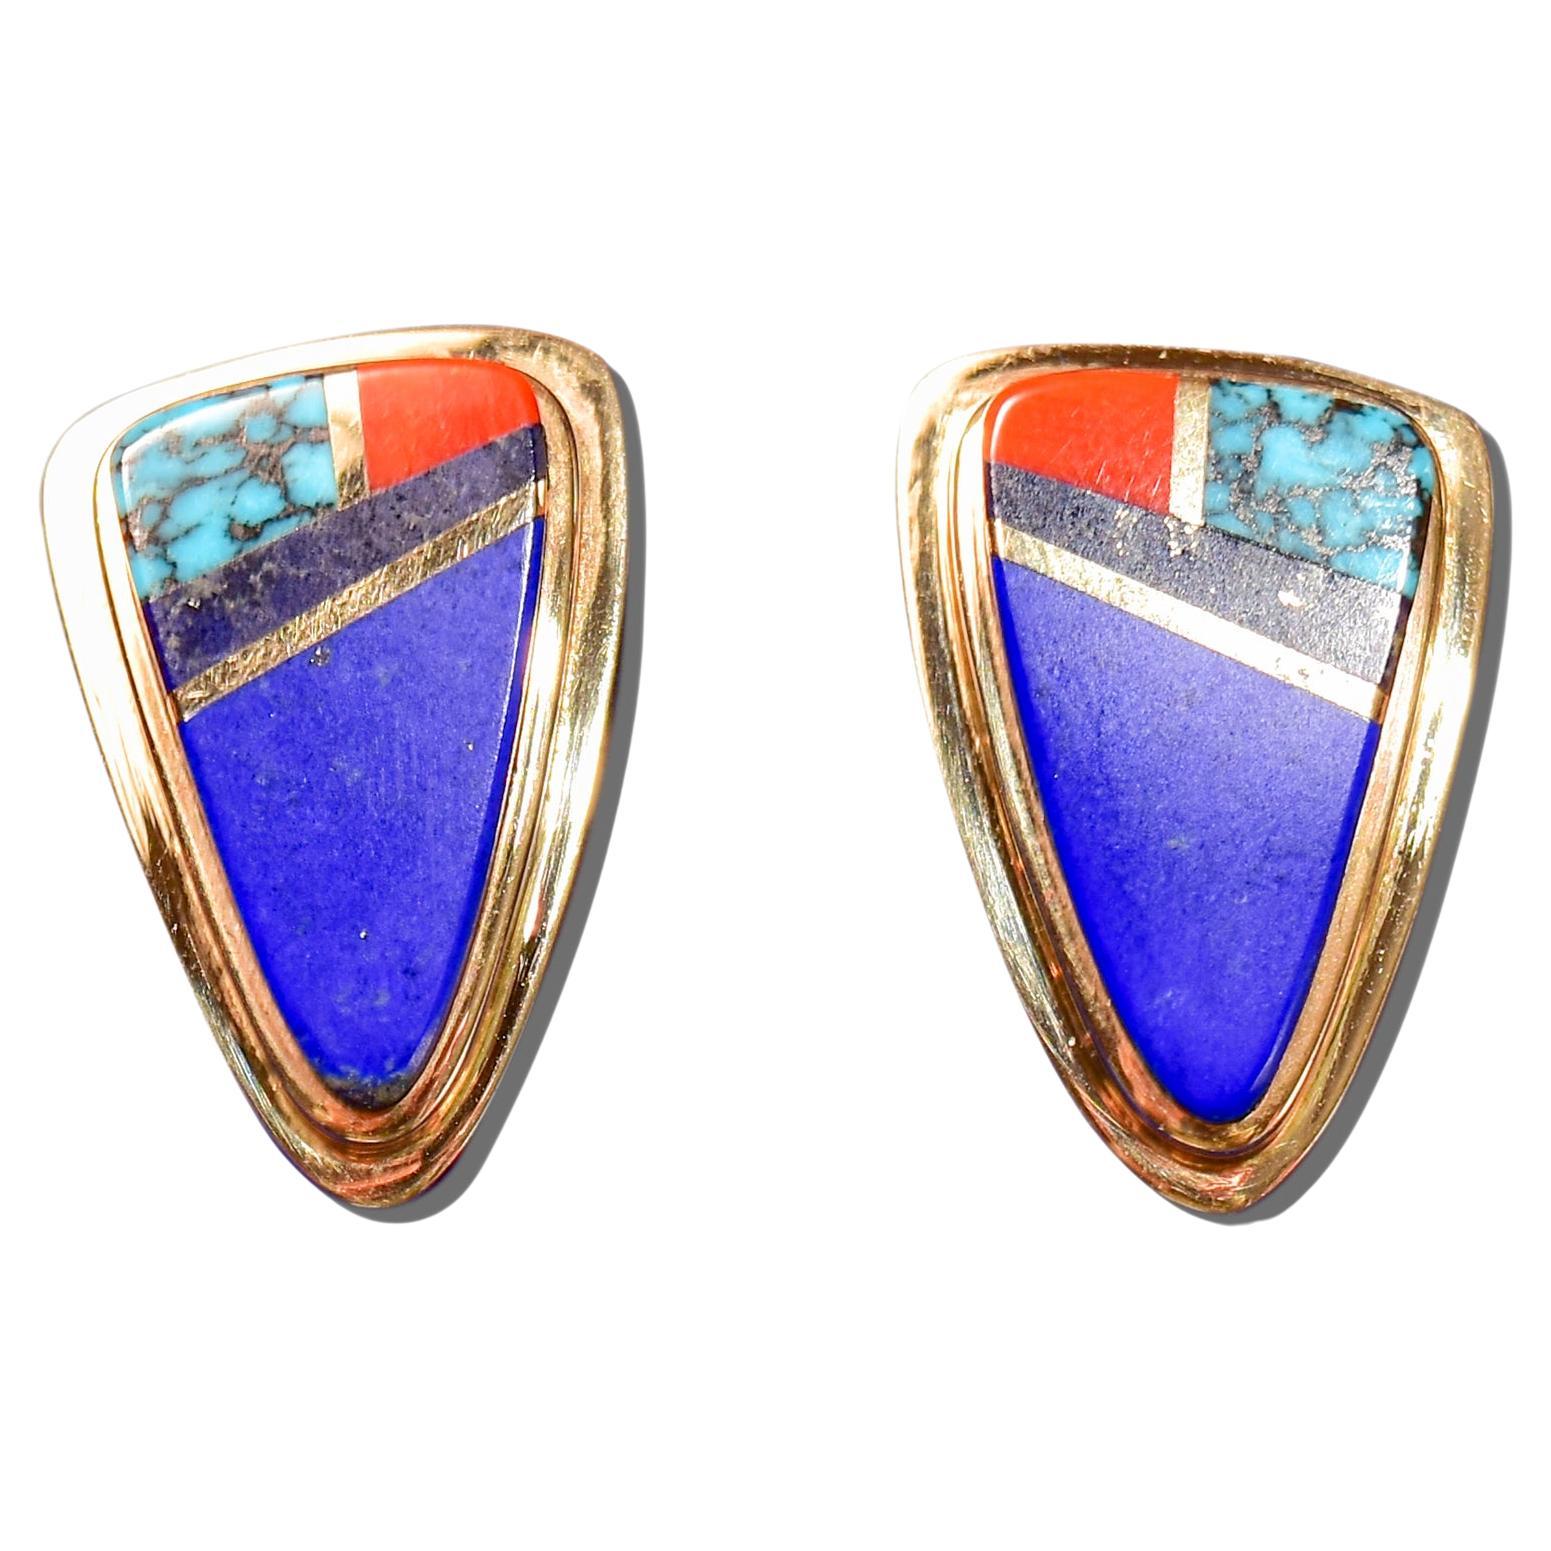 Signed Sonwai 14K Inlay Hopi Earrings For Sale